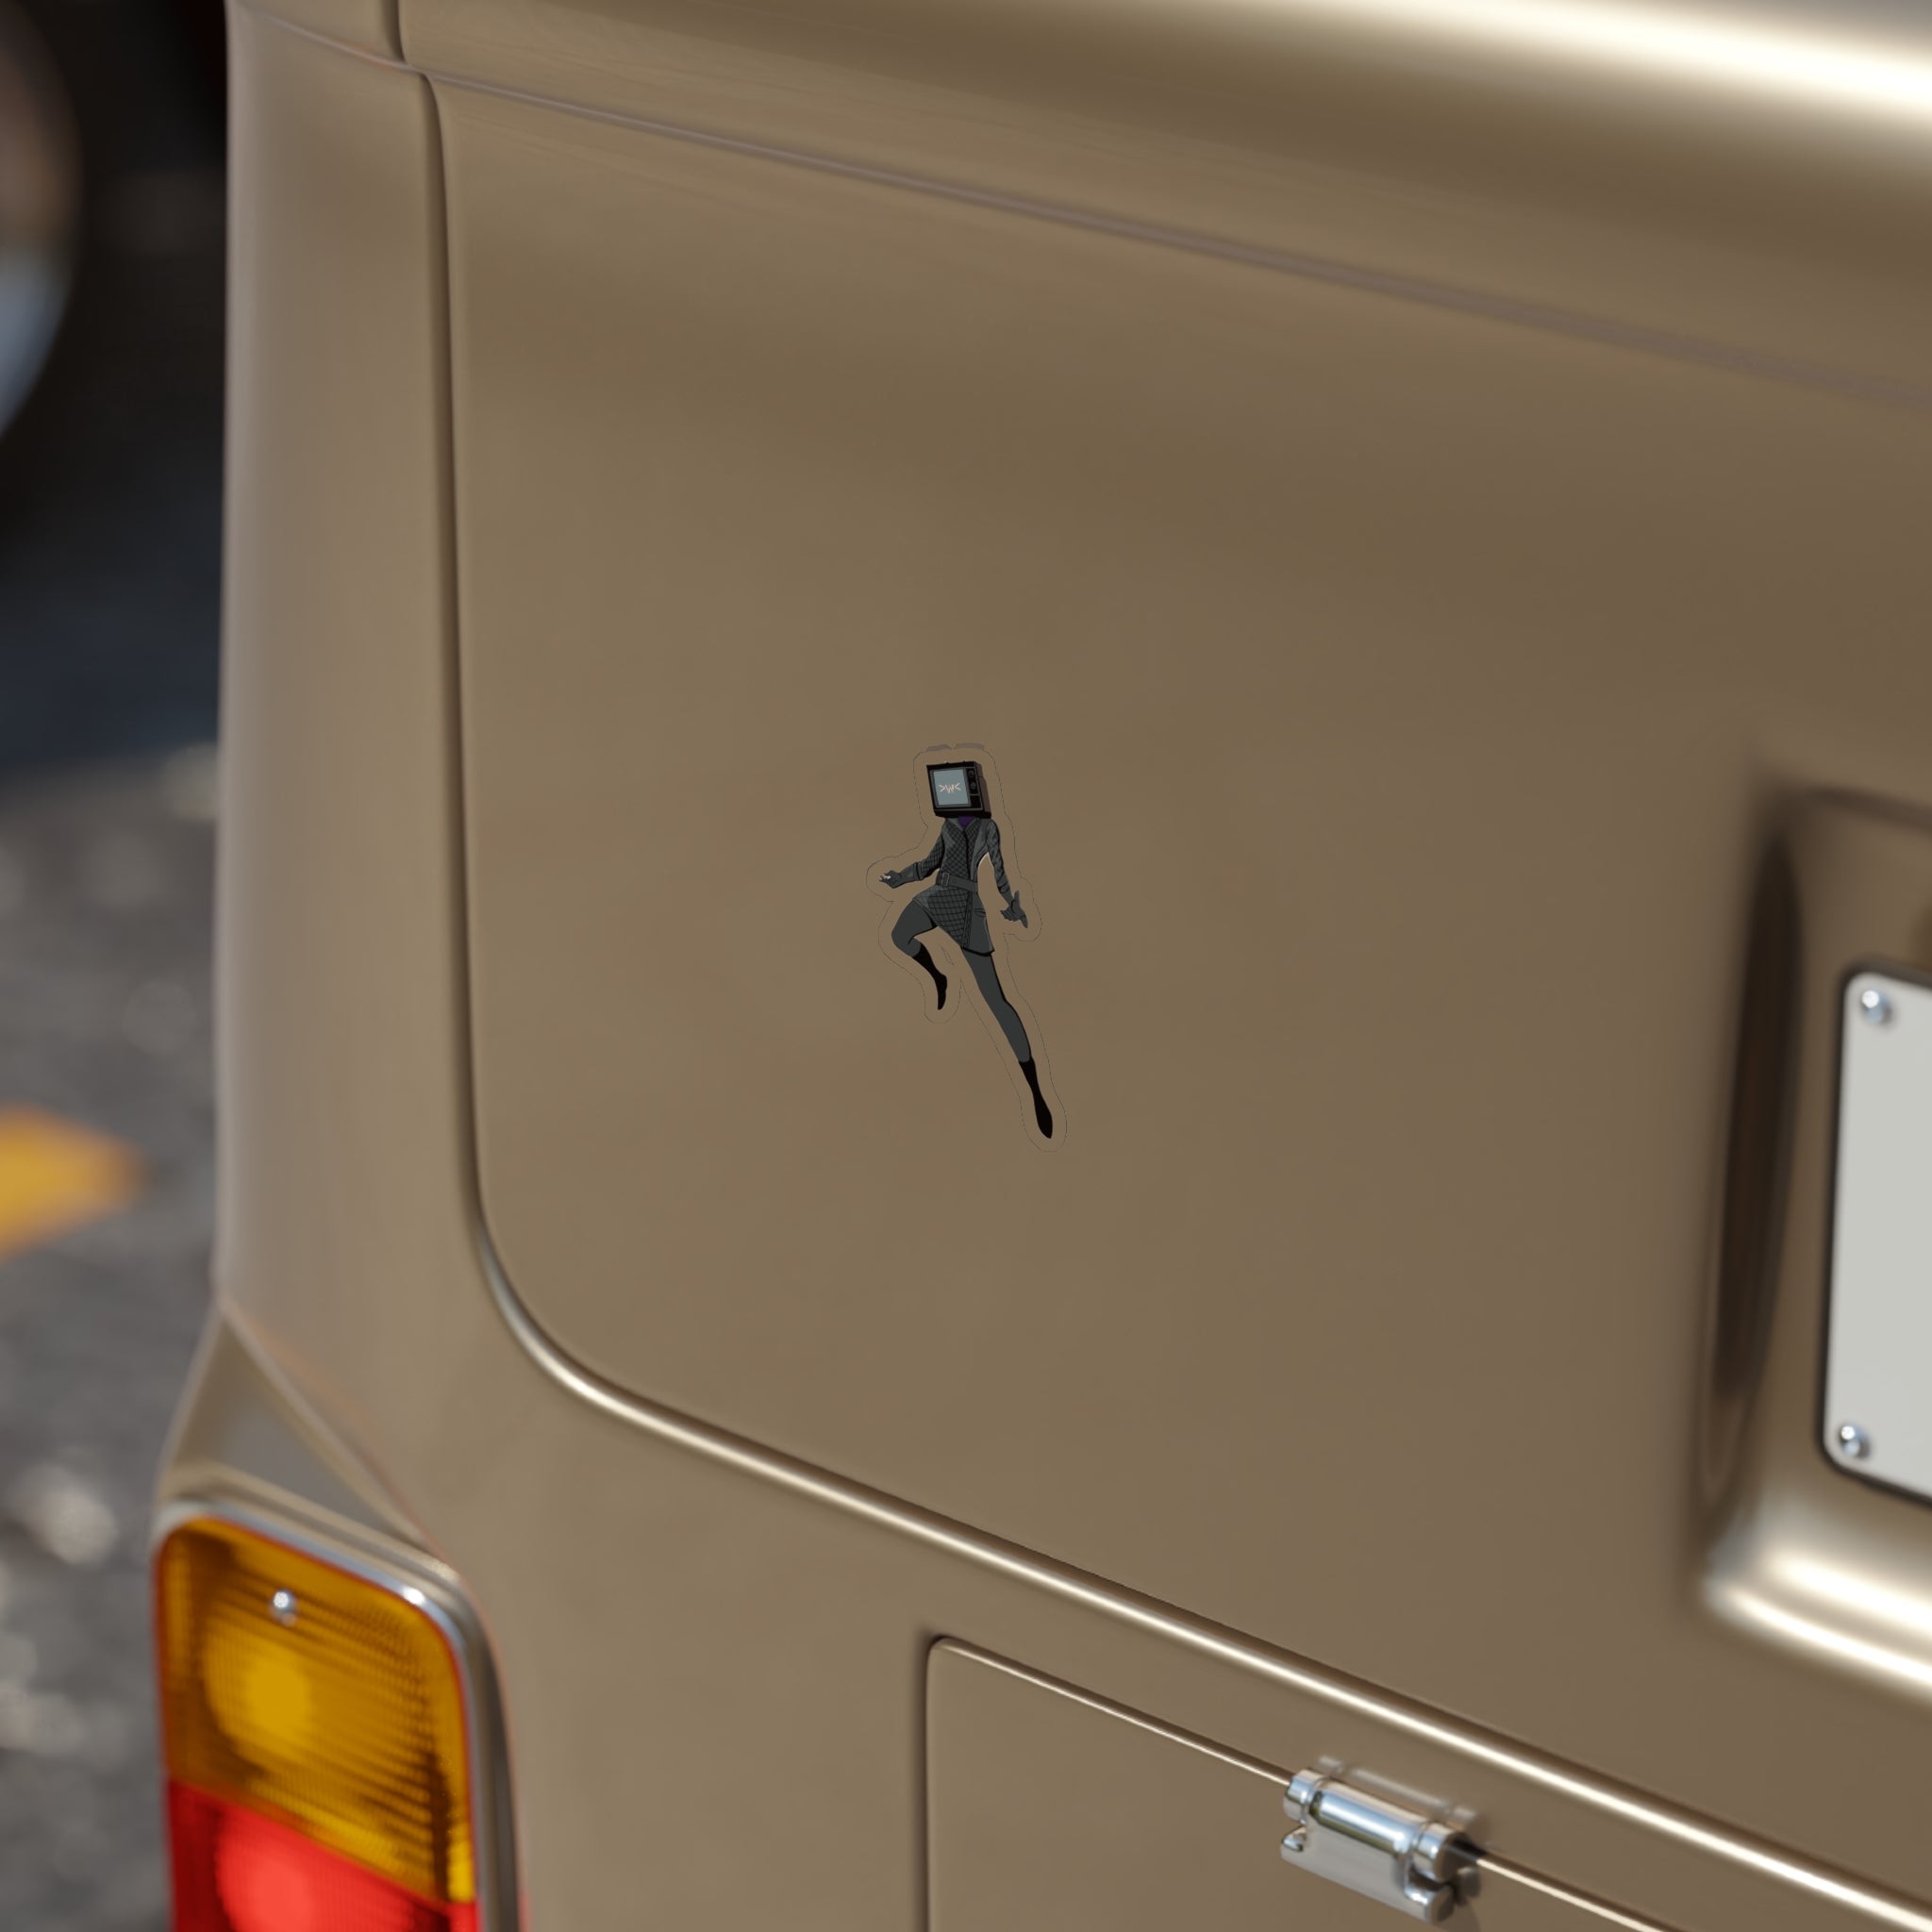 Sticker of TV Woman in a jumping pose on a gold van